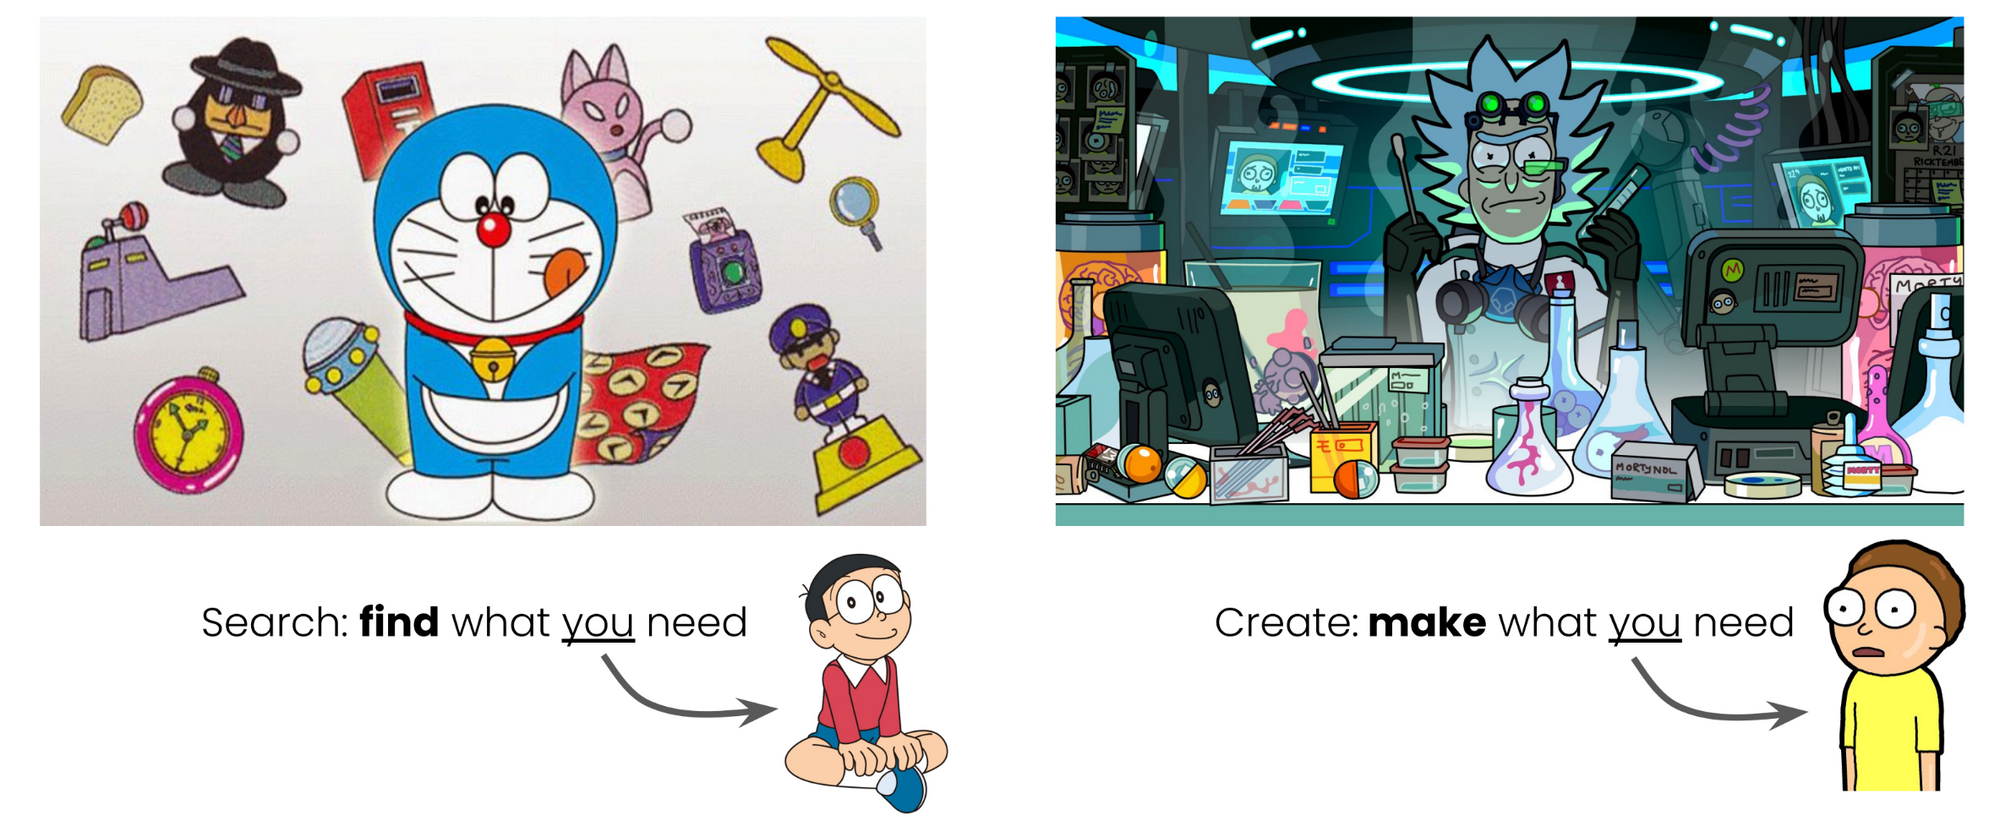 Illustration with Doraemon and a 'Search: find what you need' caption on the left, Rick and Morty with 'Create: make what you